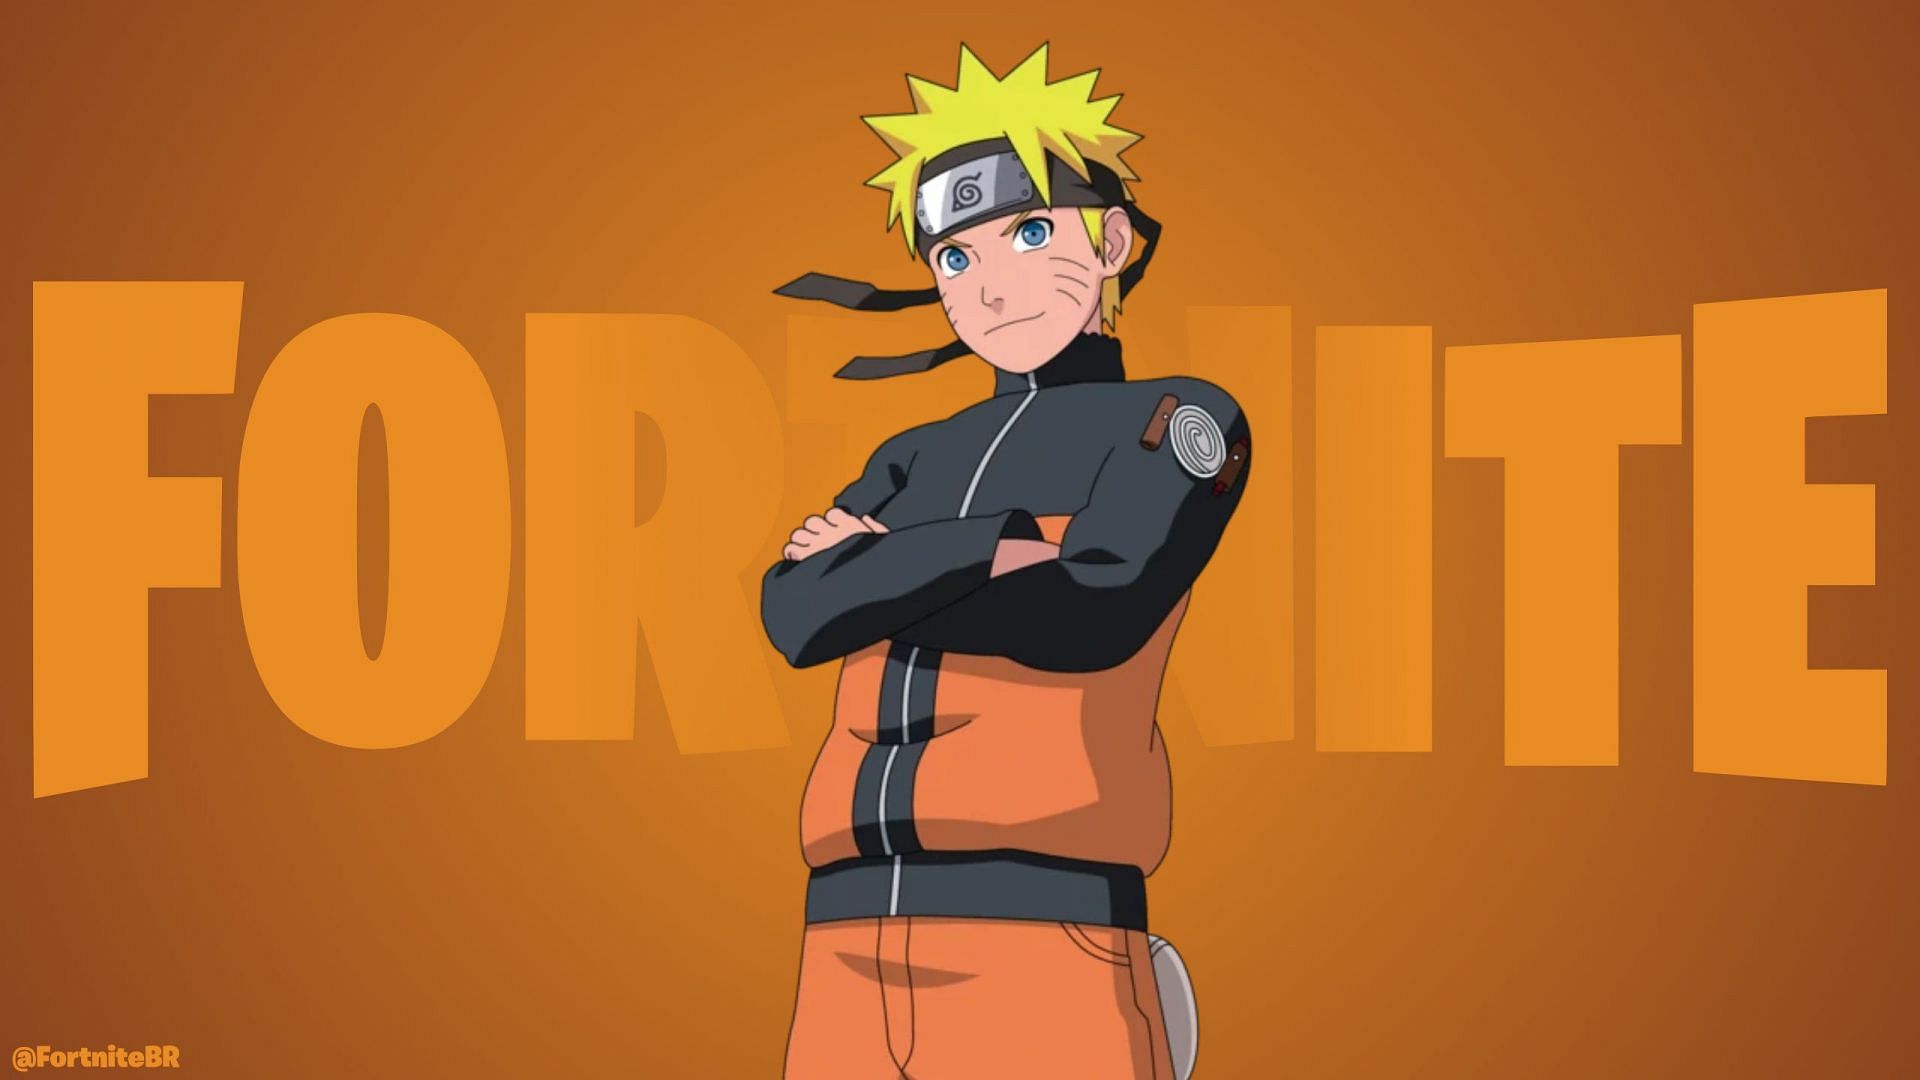 Fortnite x Naruto: How to get the free Kurama glider in Chapter 2